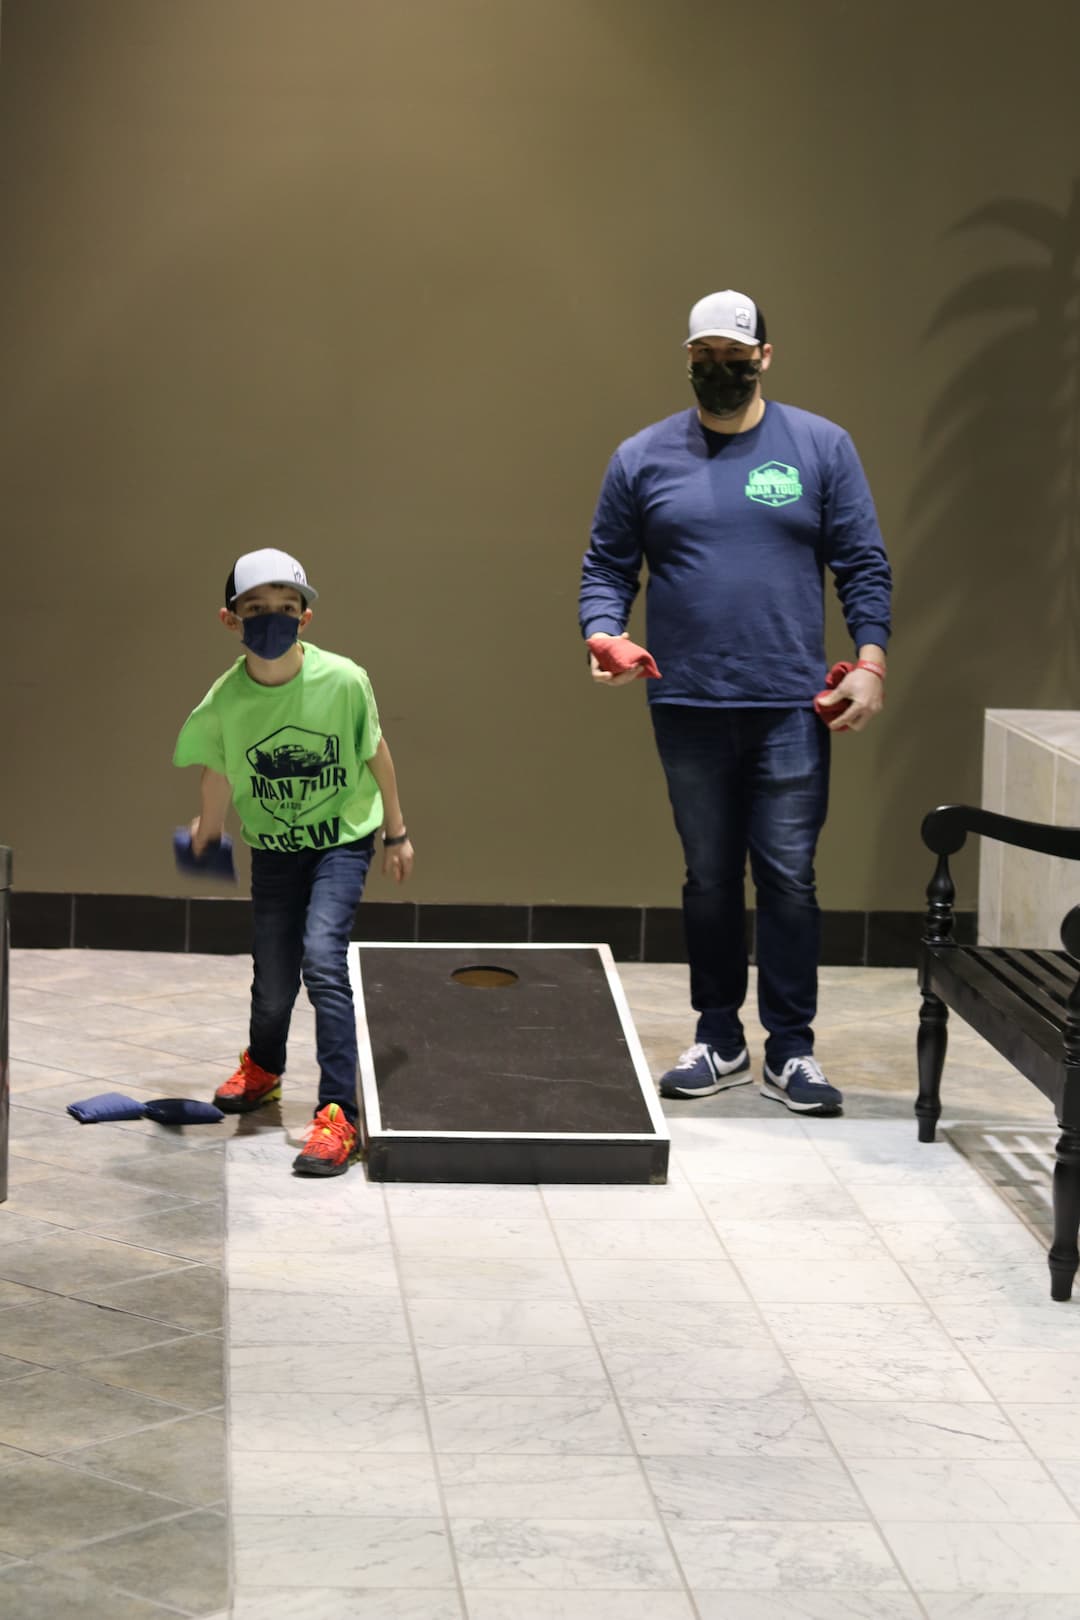 Father son playing cornhole at men's ministries event